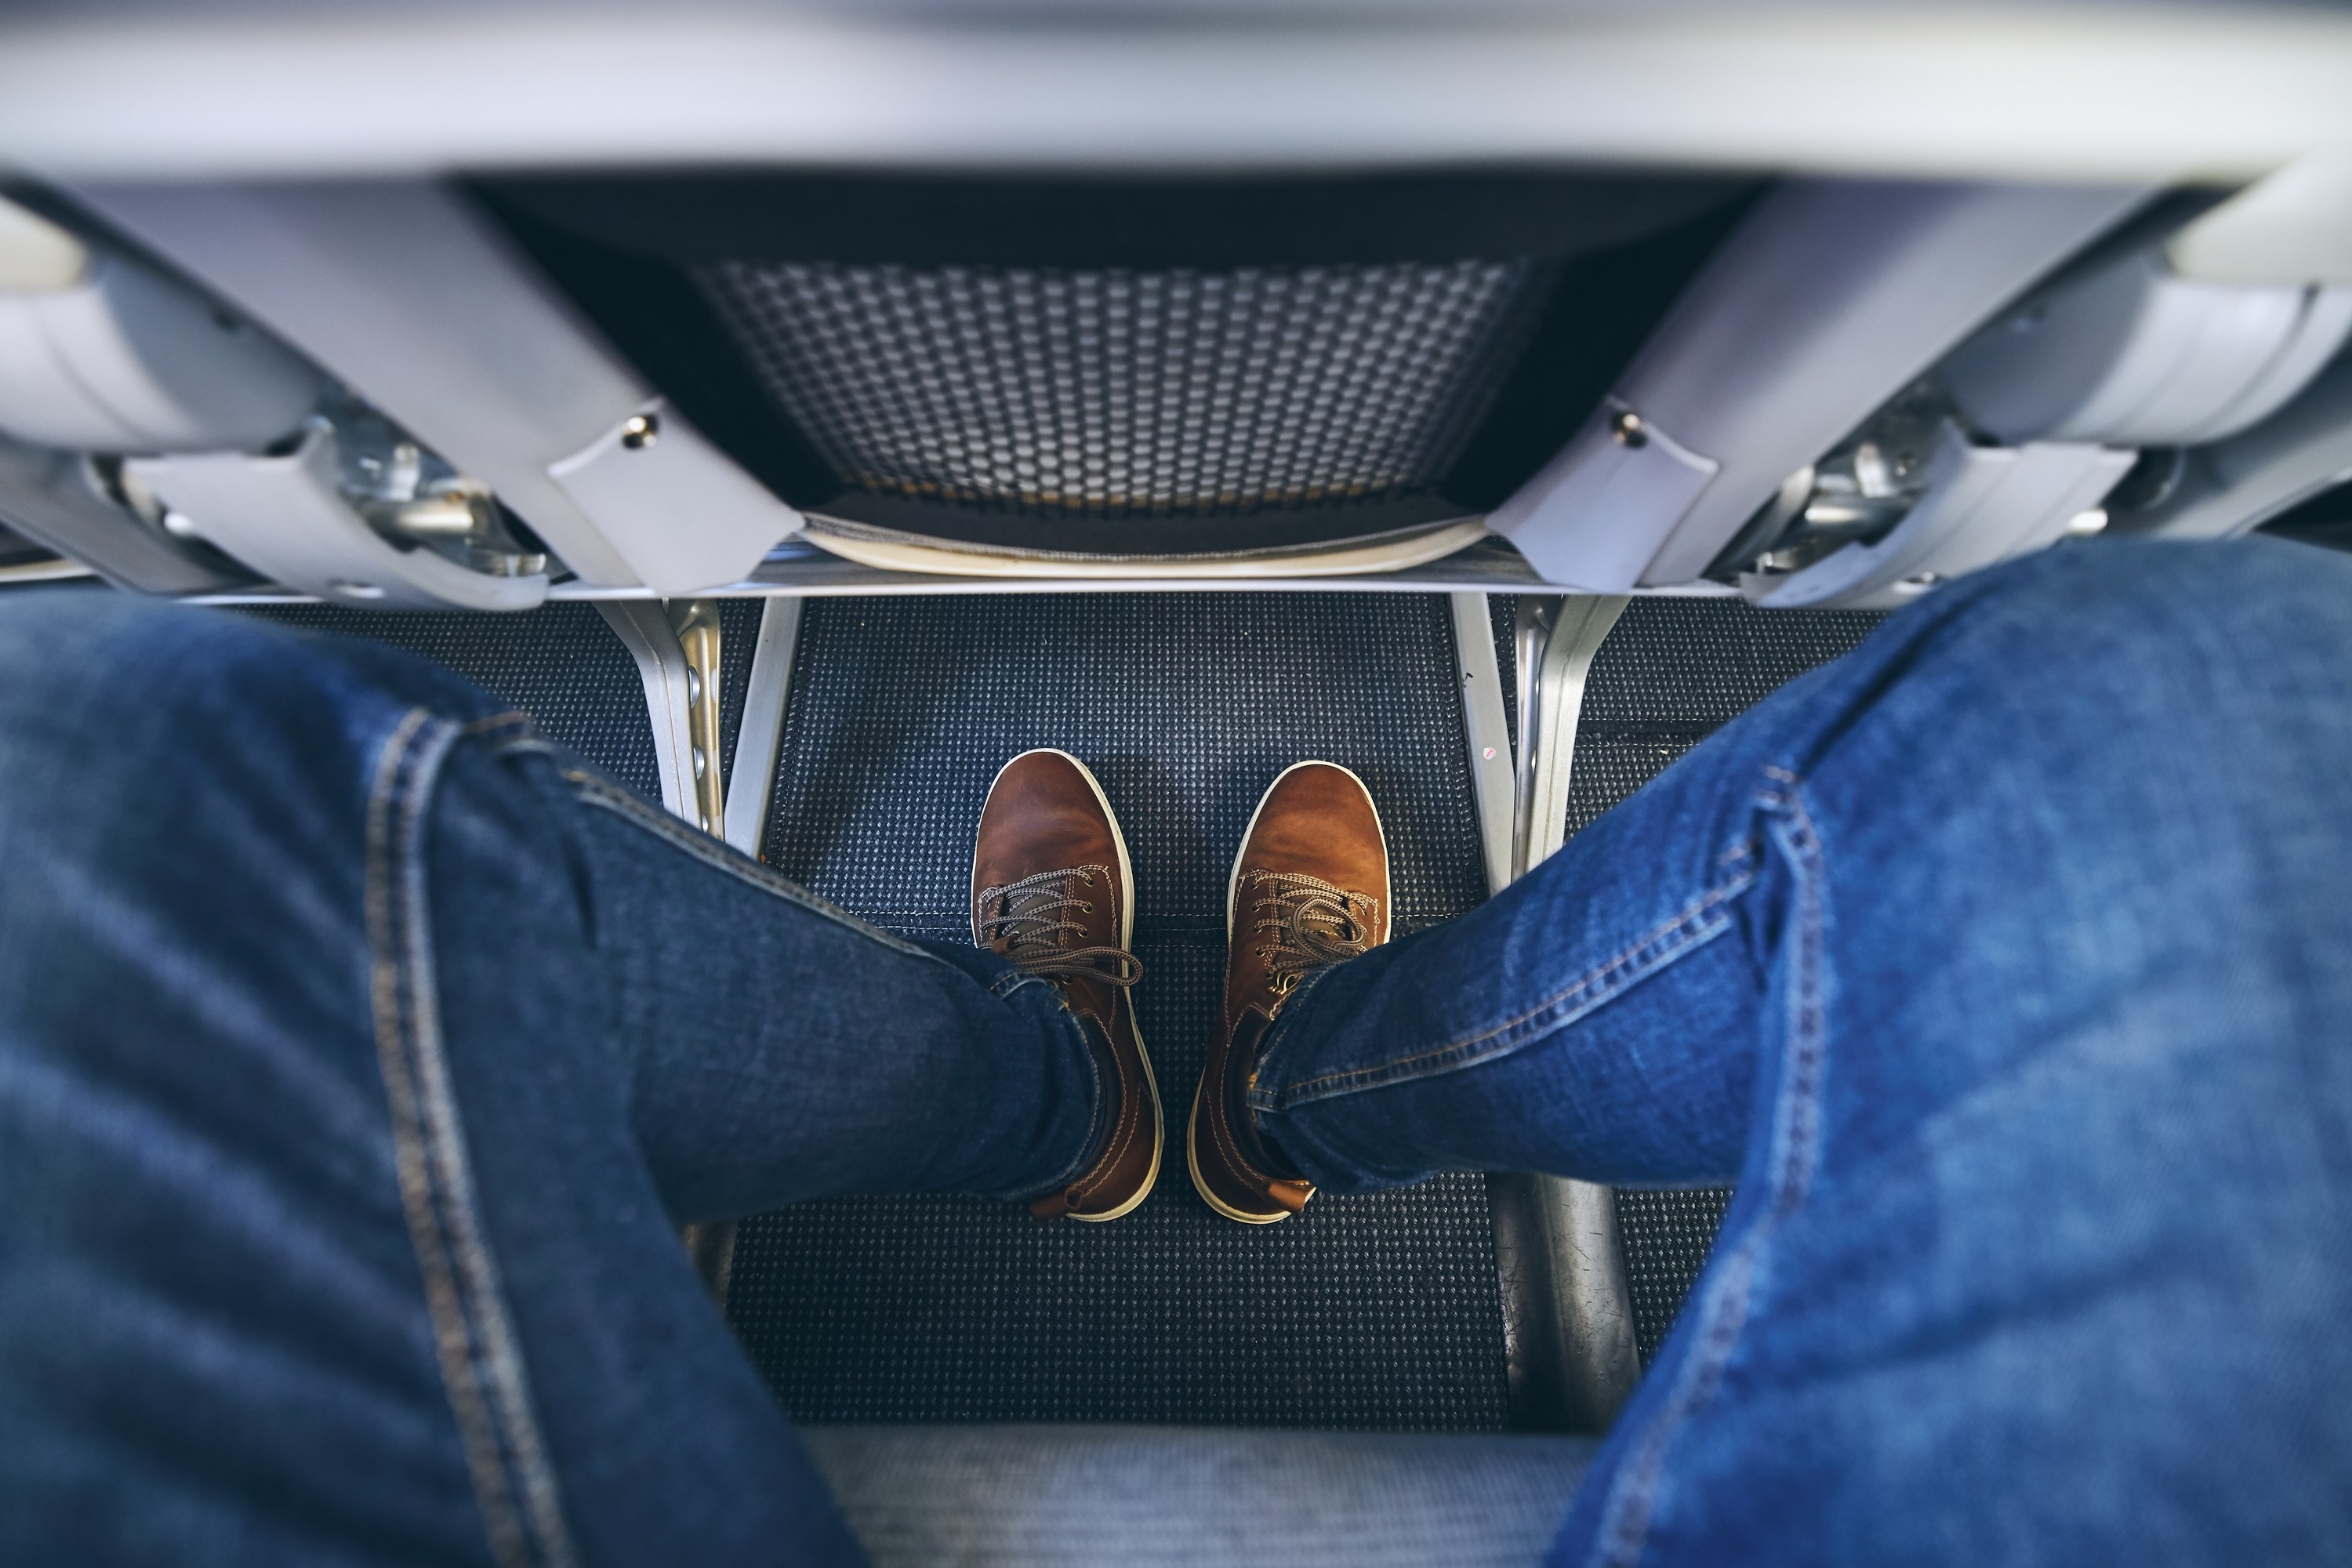 Legroom in an airplane